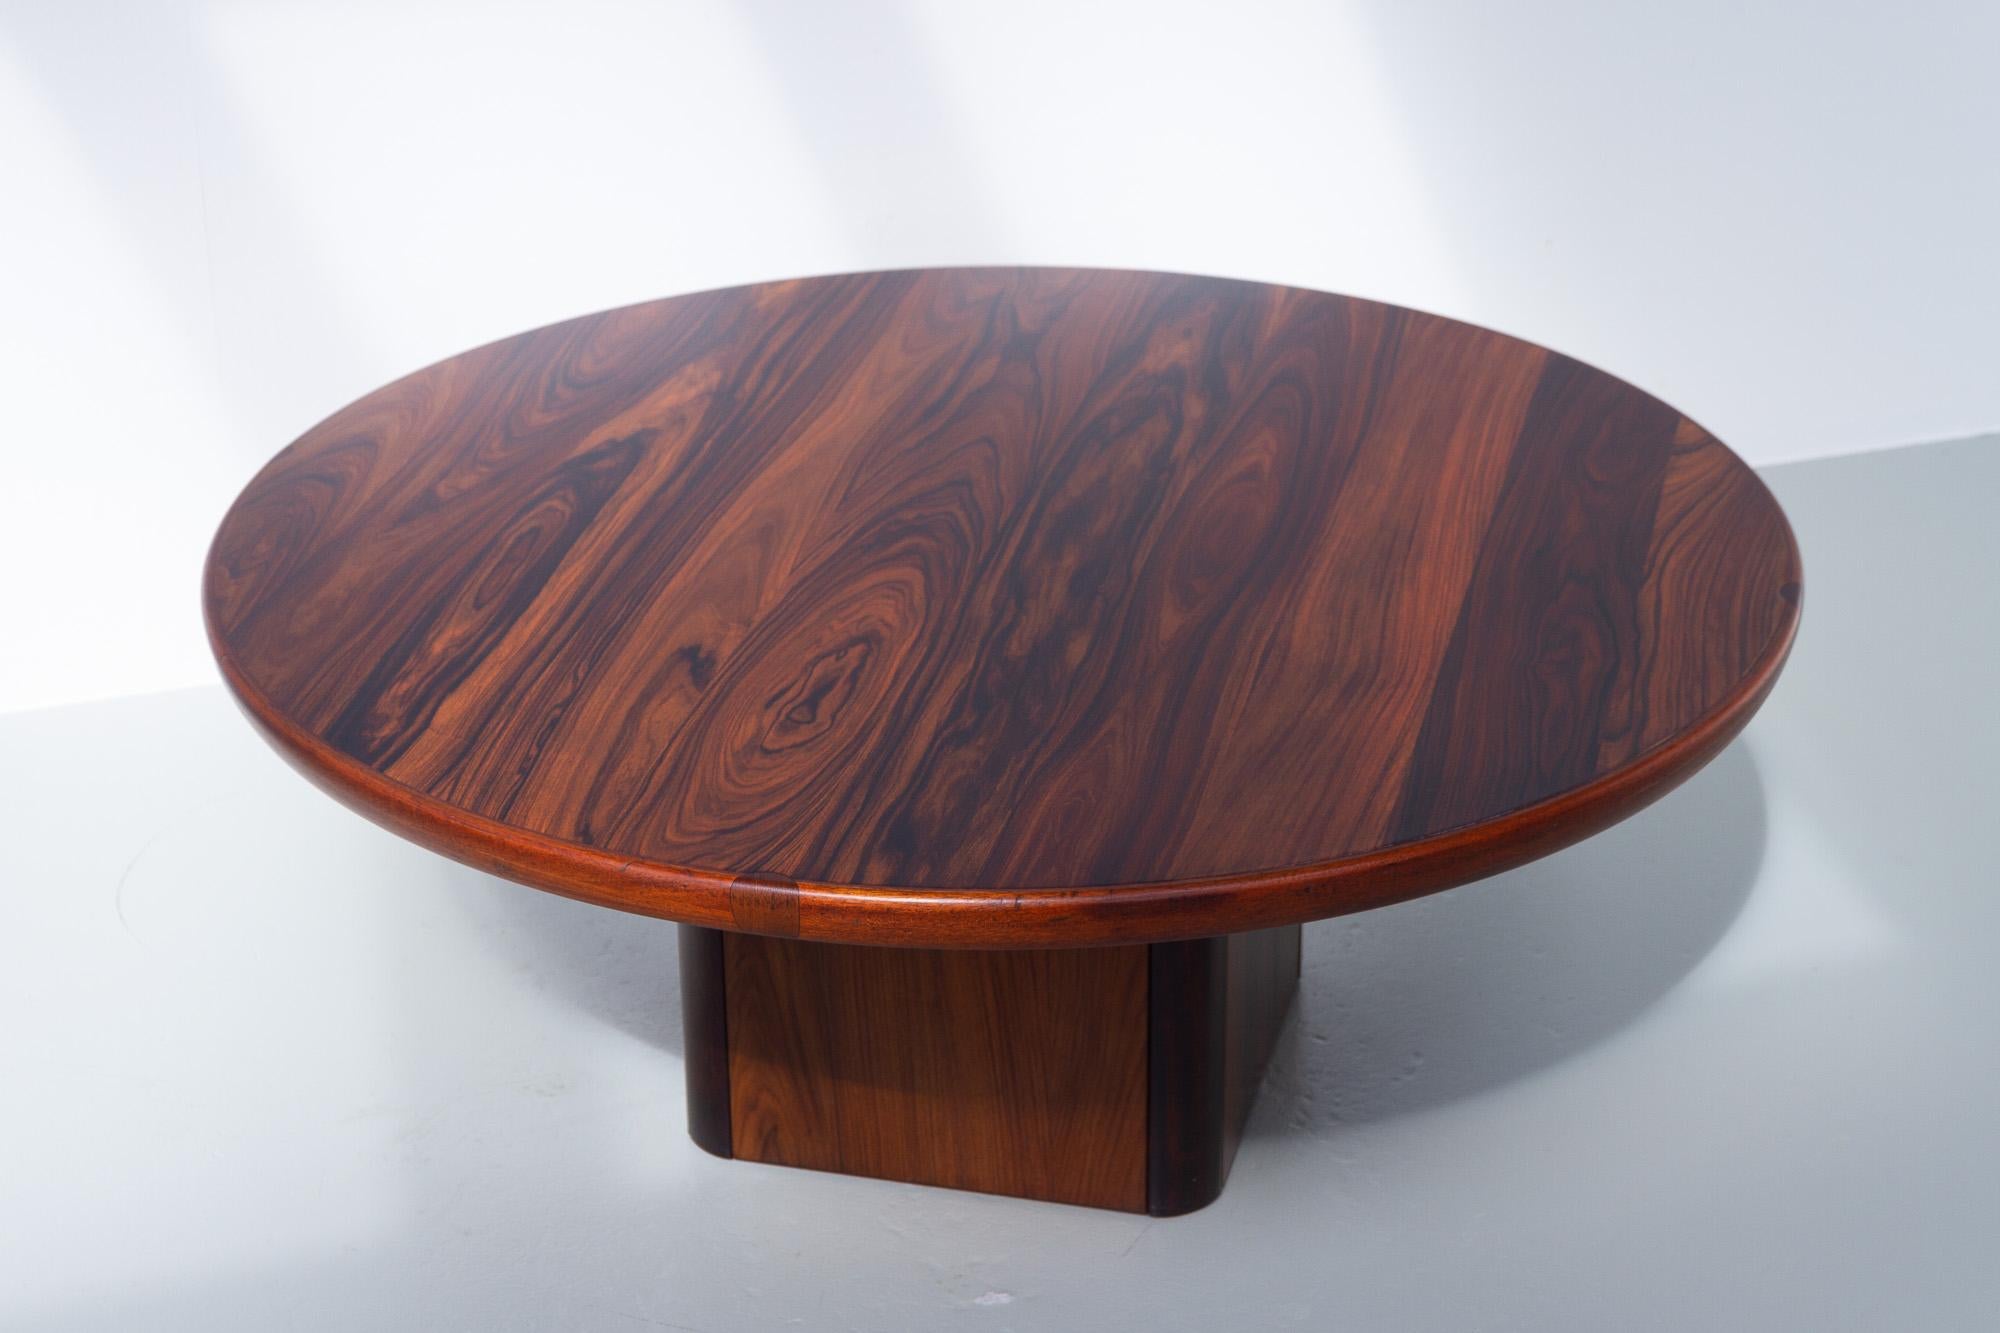 Danish Modern Rosewood Coffee Table by Jensen Frøkjær, 1960s.
Round Scandinavian Mid-century Modern coffee table designed and manufactured by Jensen Frøkjær A/S, Denmark in the 1960s.
Hollow square base with rounded corners. Thick table top with